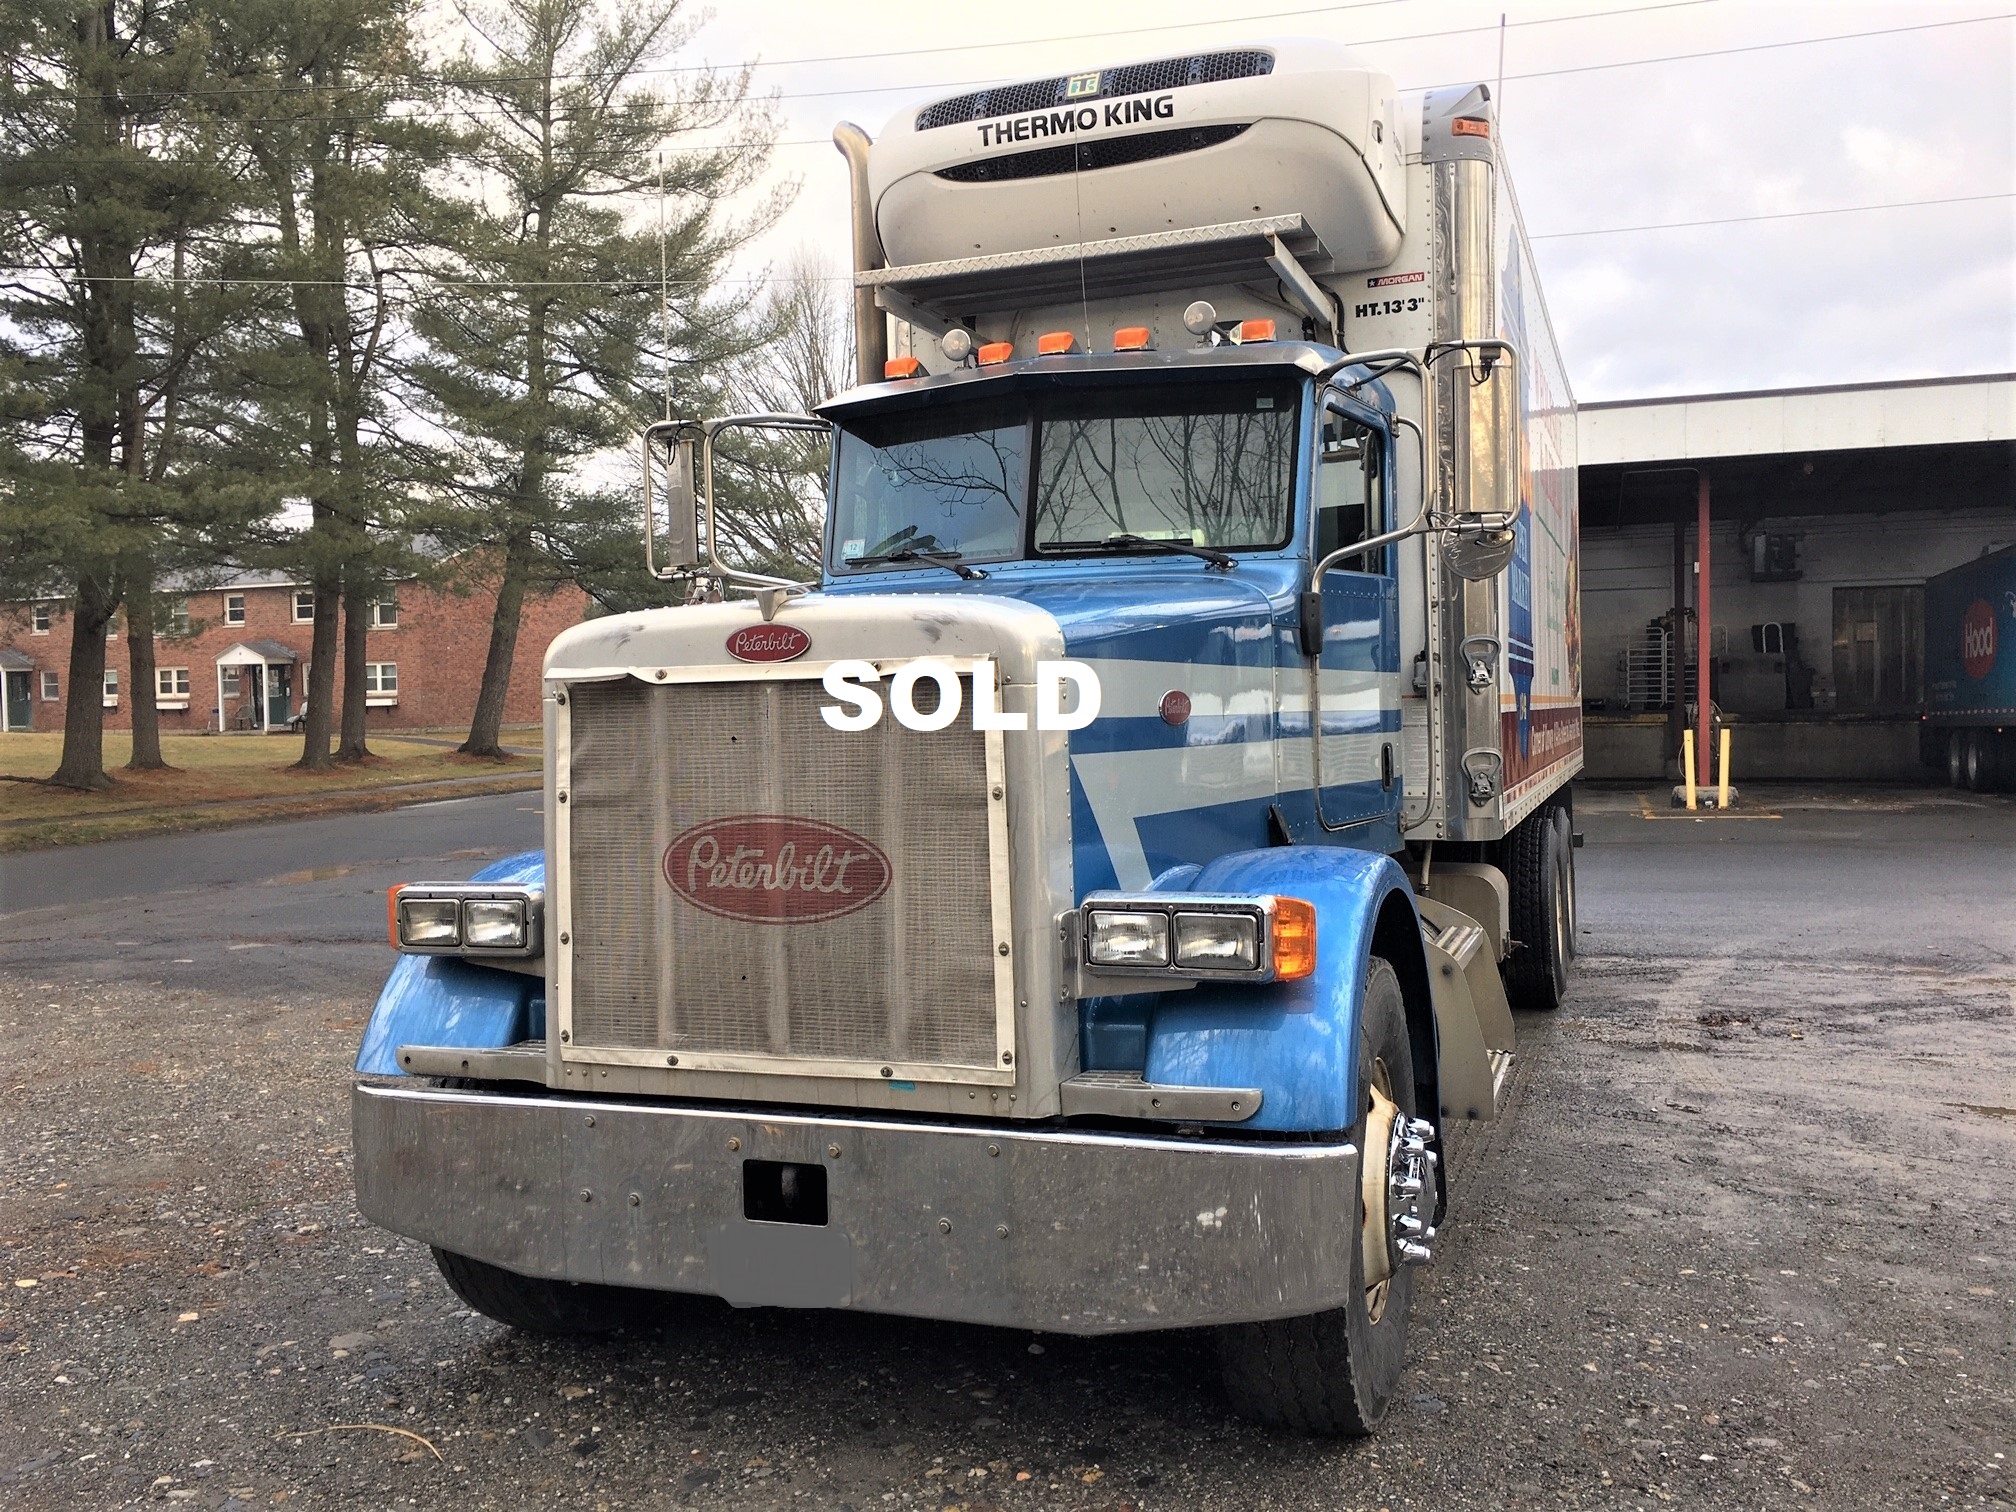 2005 Peterbuilt Refrigerated Box Truck for sale. Sold!